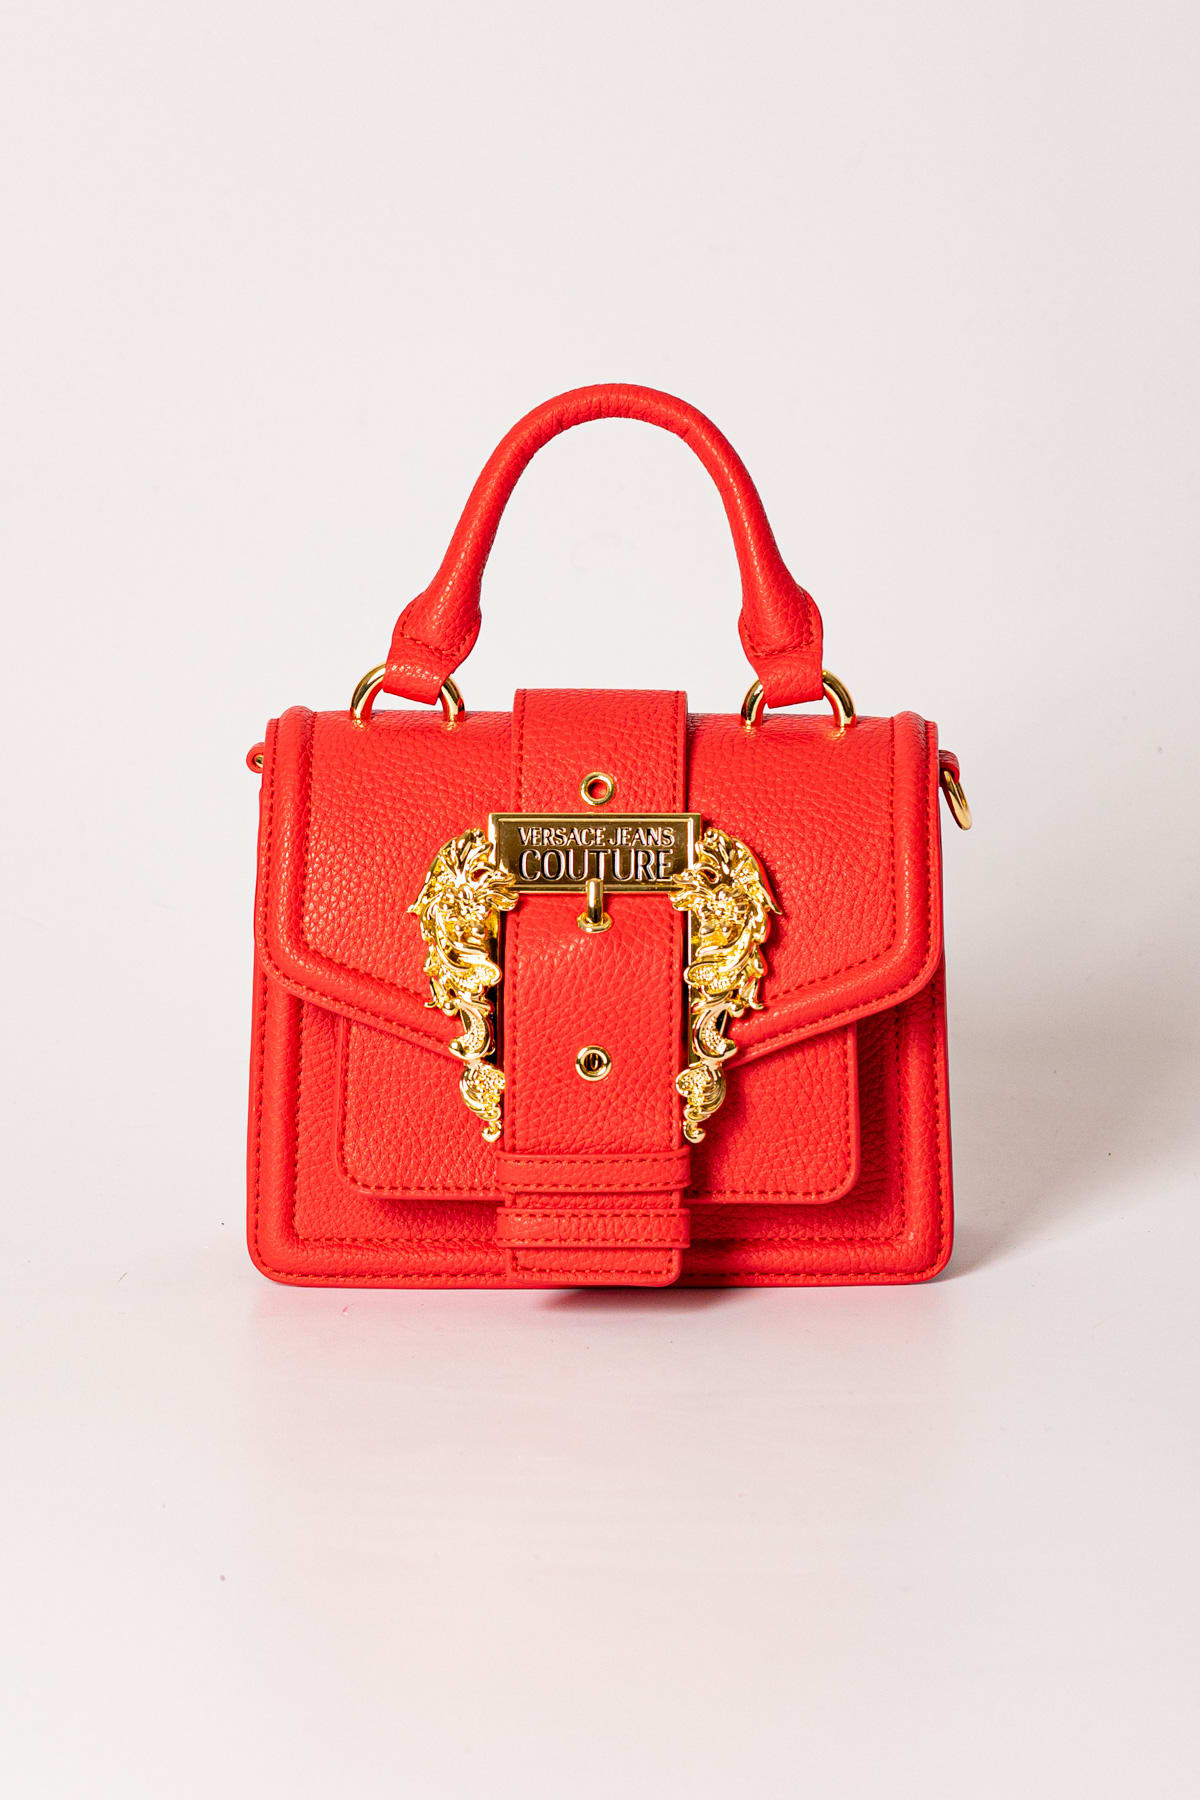 Versace Jeans Couture Shoulder Bag In Rosso